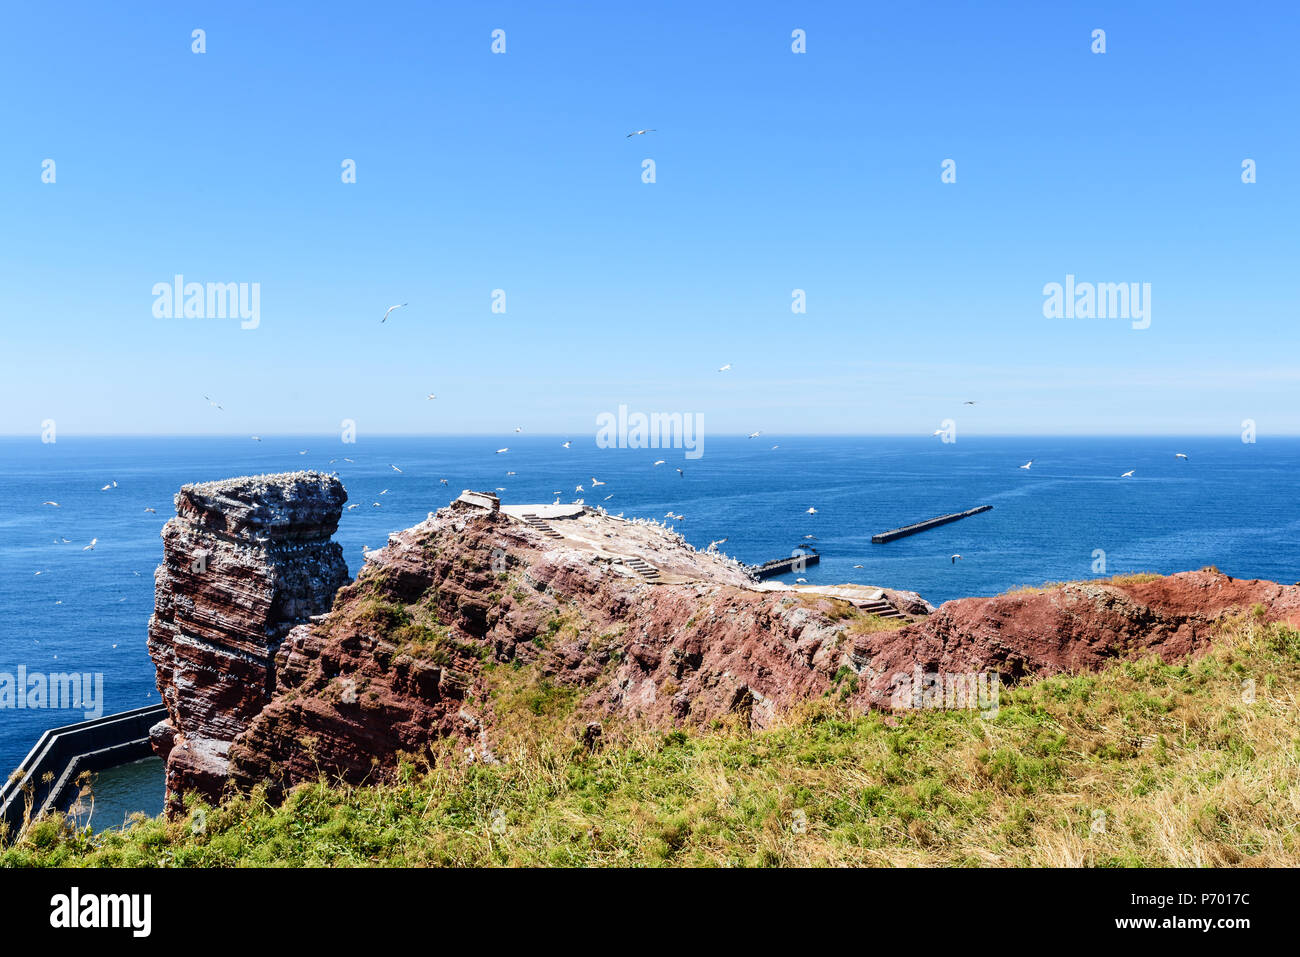 Lange Anna sea stack rock on Helgoland island against blue sea on clear day Stock Photo